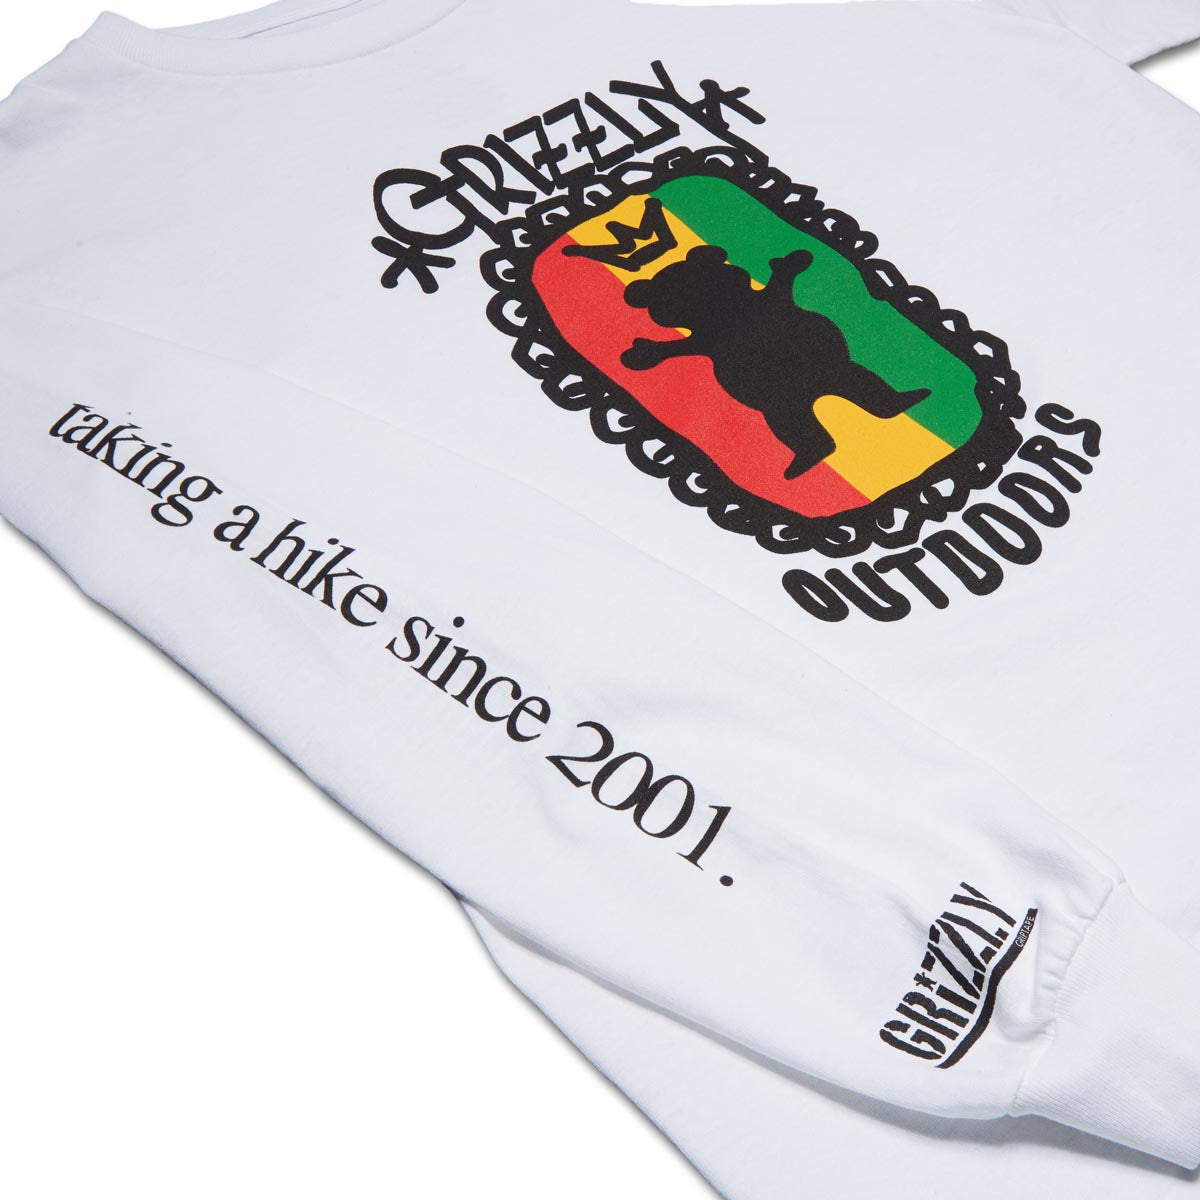 Grizzly Most High Long Sleeve T-Shirt - White image 2